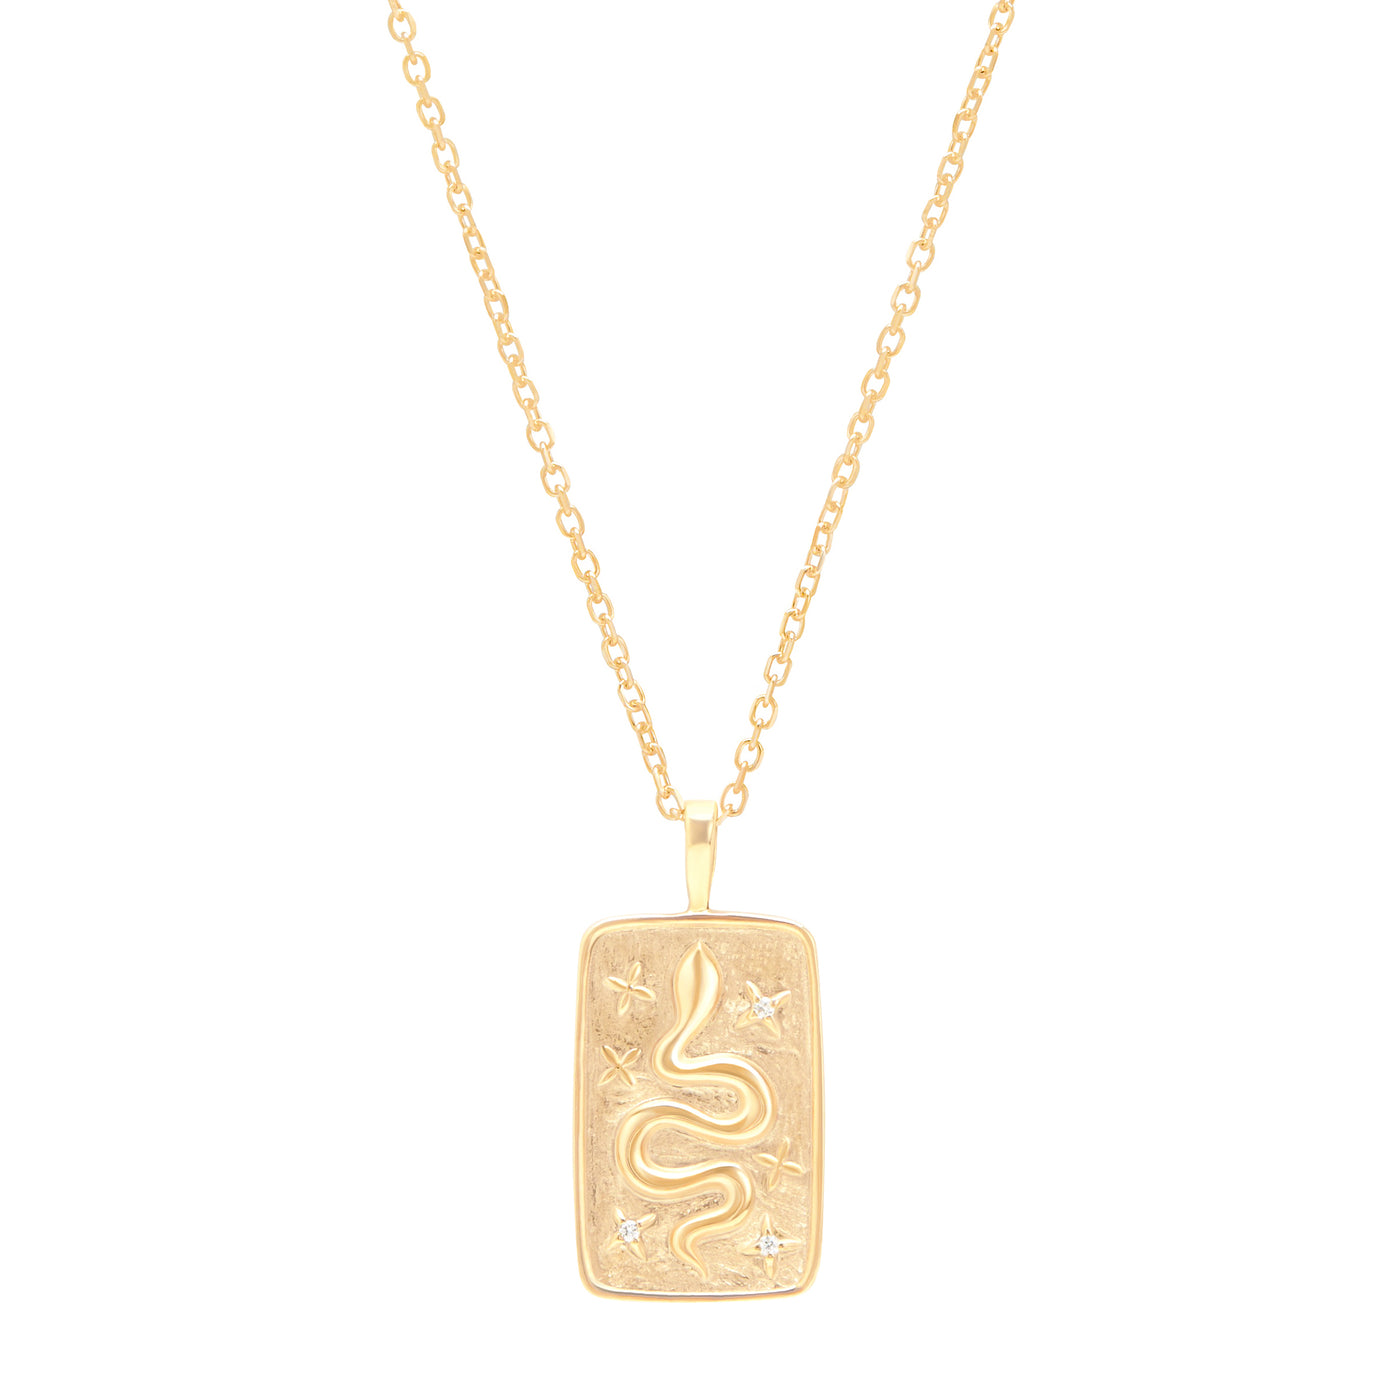 Snake pendant yellow gold on cable chain on white background